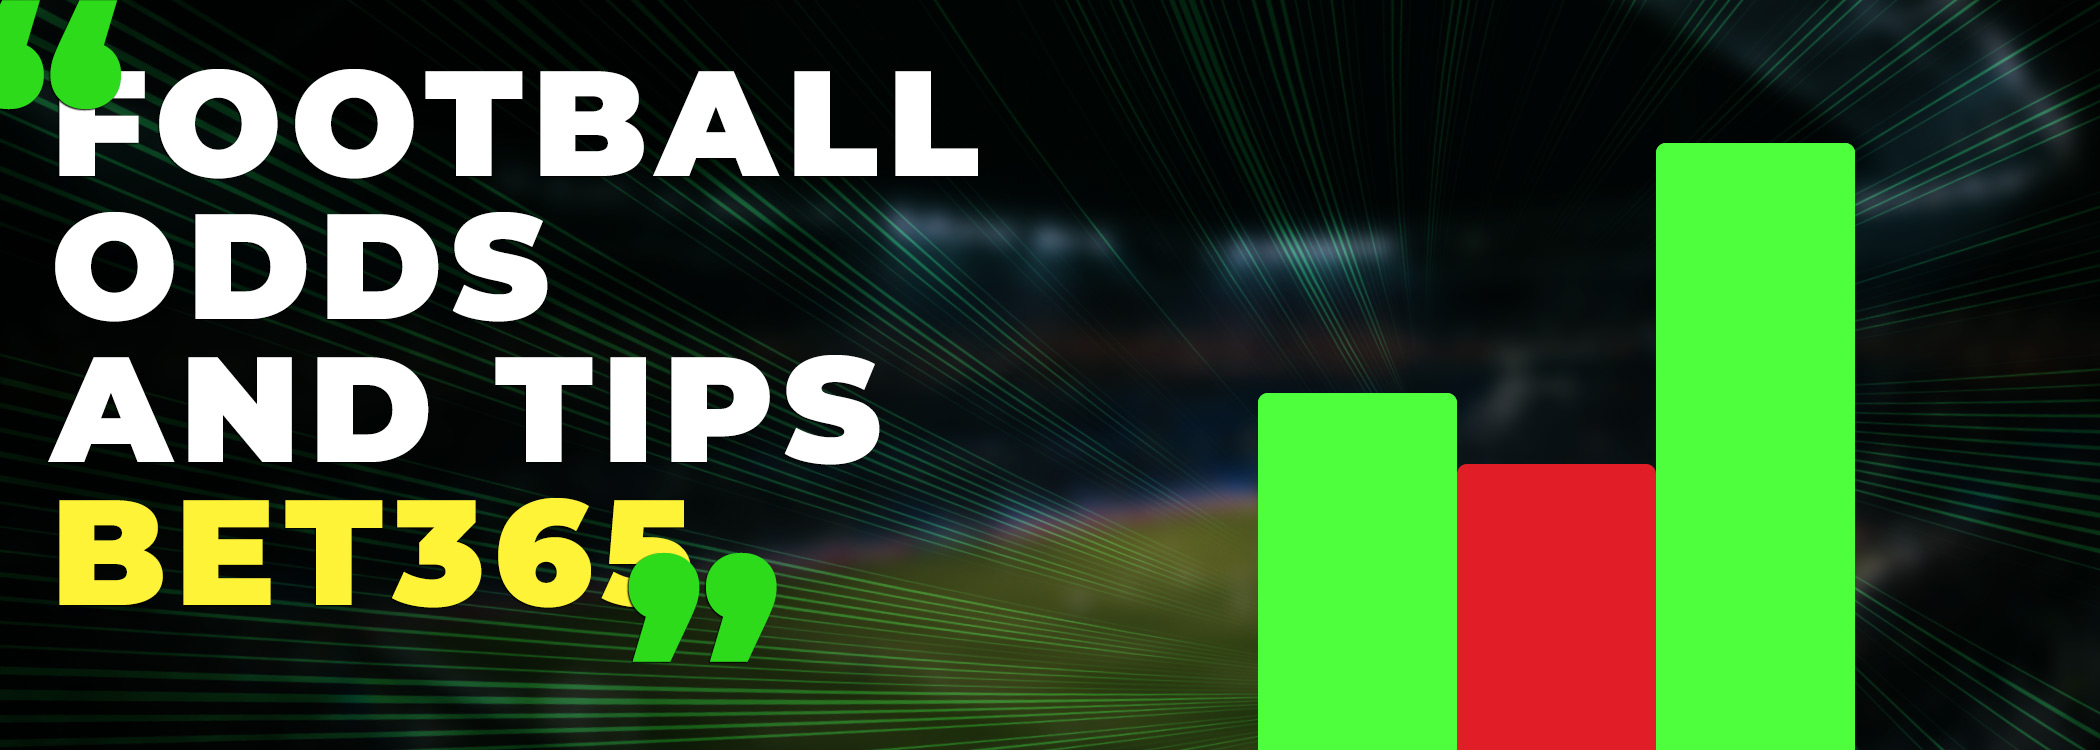 Football odds and tips.